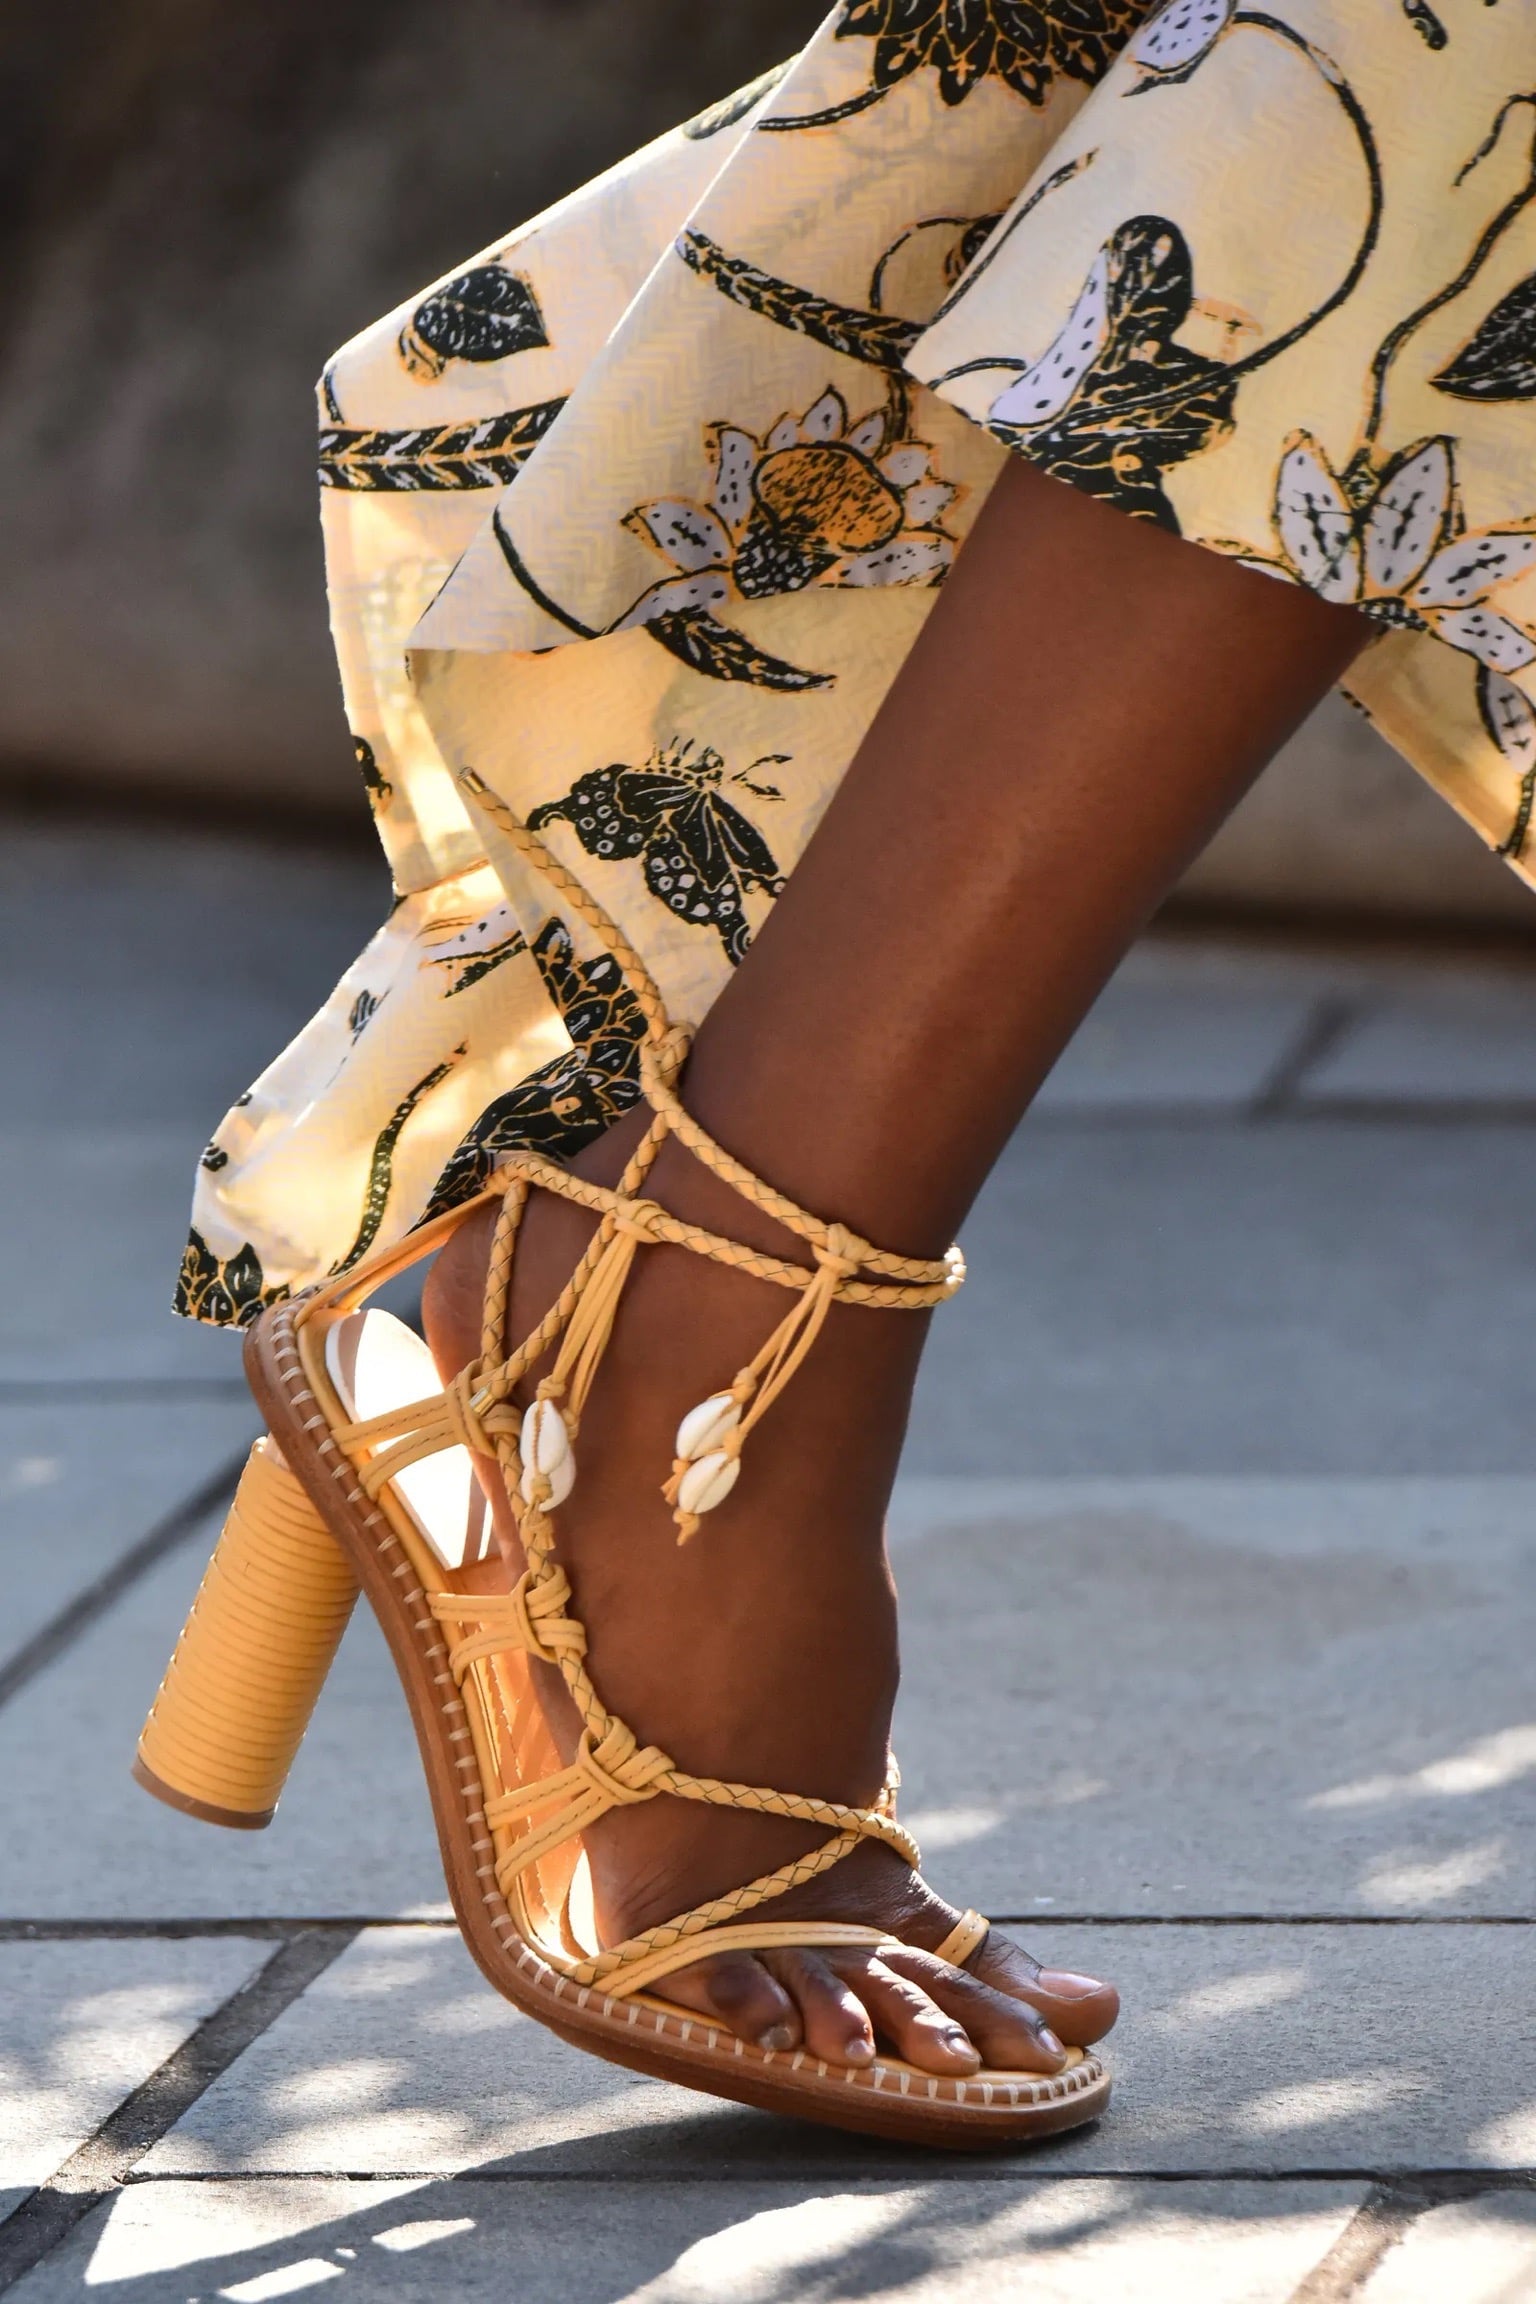 Shoes from Ulla Johnson spring 2022 collection. | 6 Shoe Trends We'll Be  Adding to Our Spring '22 Wish Lists | POPSUGAR Fashion Photo 46